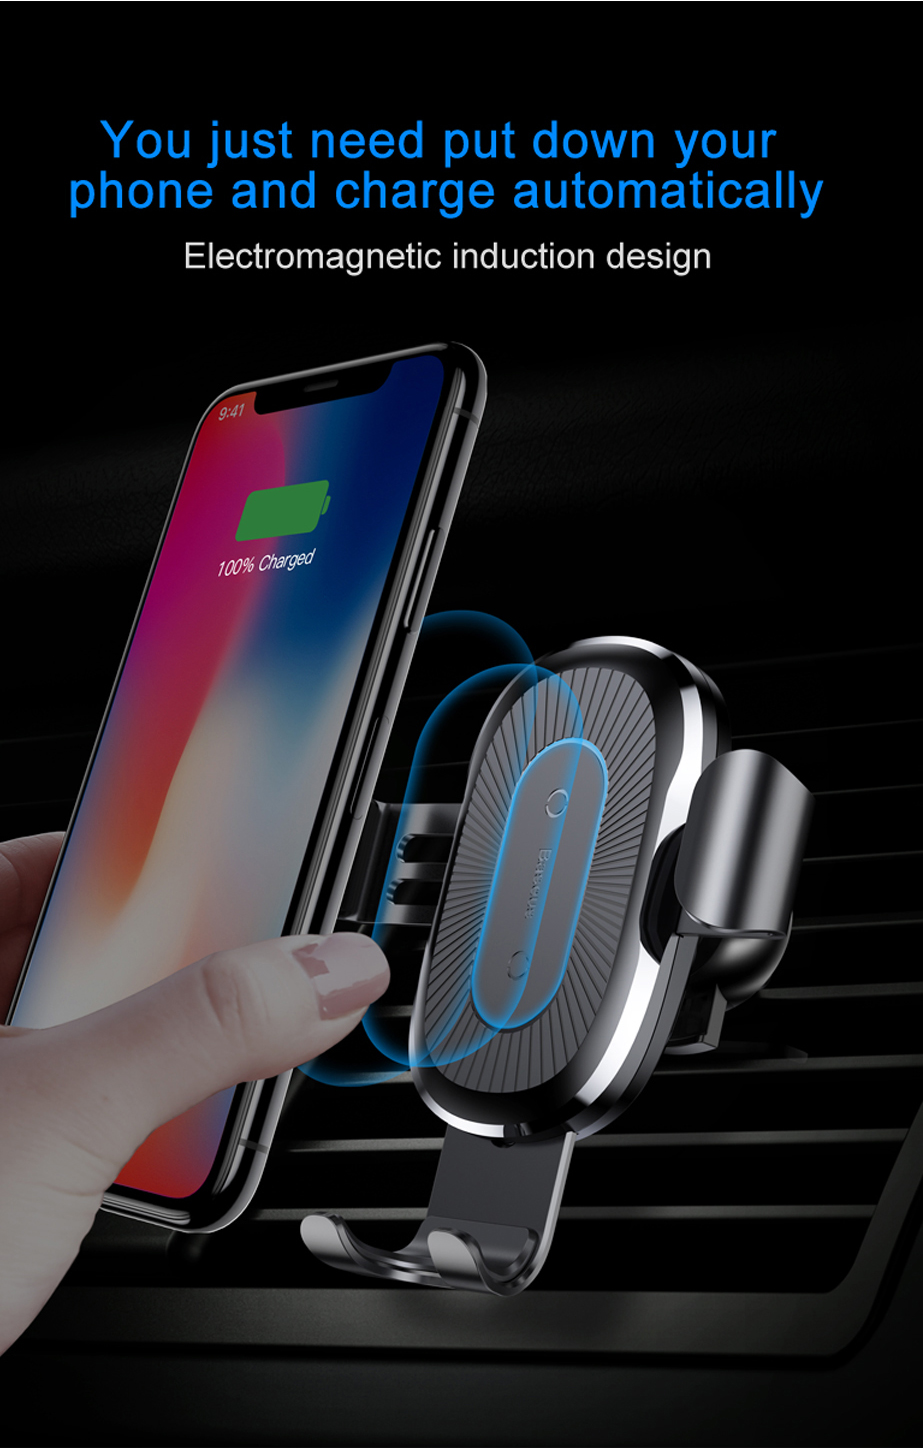 Baseus-WXYL-B09-Fast-10W-Qi-Wireless-Charger-Mount-Holder-for-iPhone-X-8-Plus-S8--S9-1322638-3